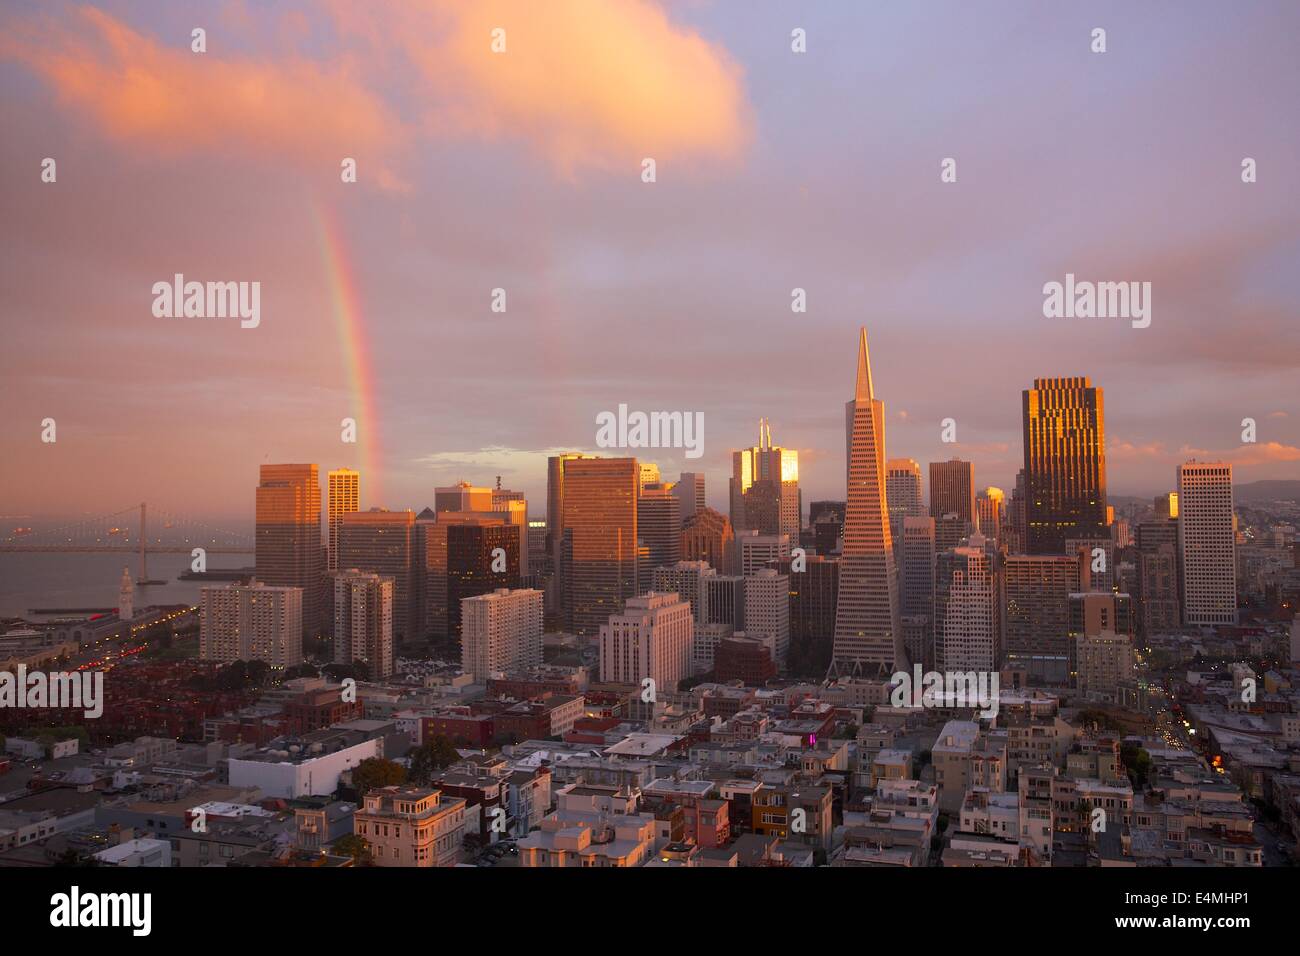 View of a lifetime: a stunning rainbow over San Francisco at sunset from Coit Tower. Stock Photo